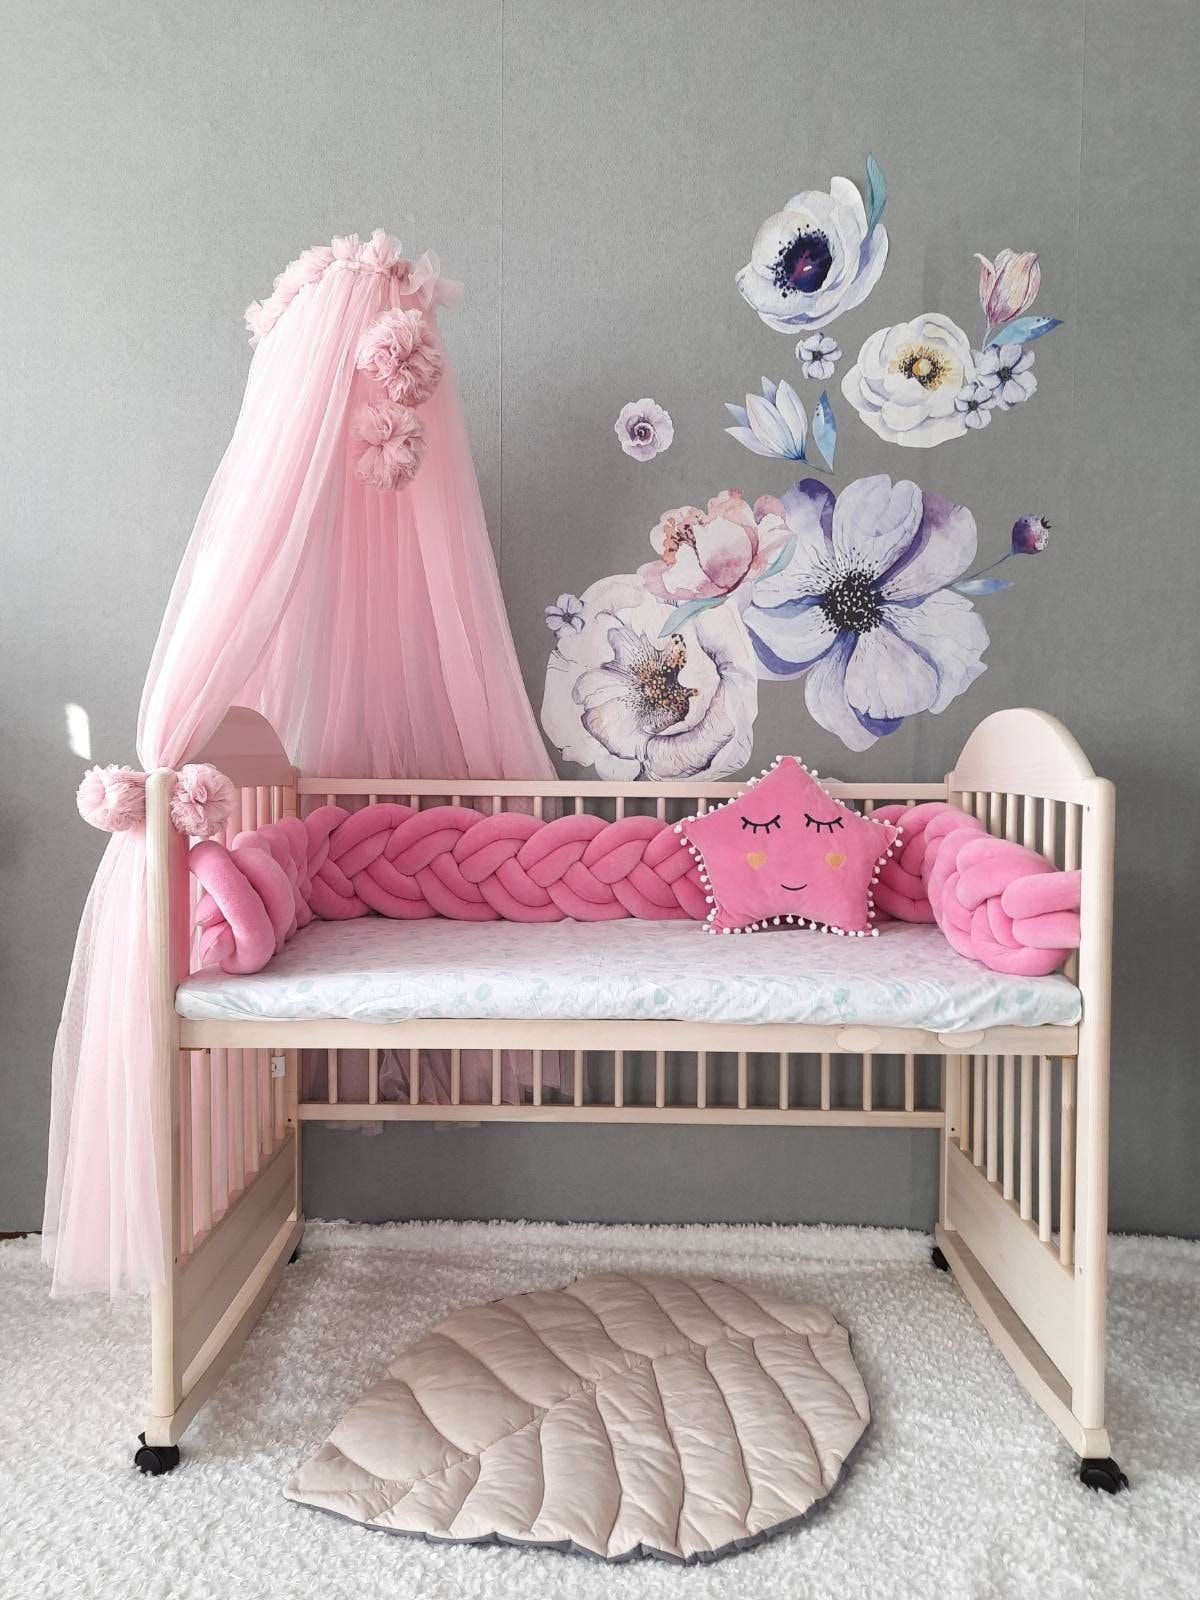 Canopy Bed tulle for nursery / Kids hanging tent for bedroom / Princess playhouse / Pom Pom canopy